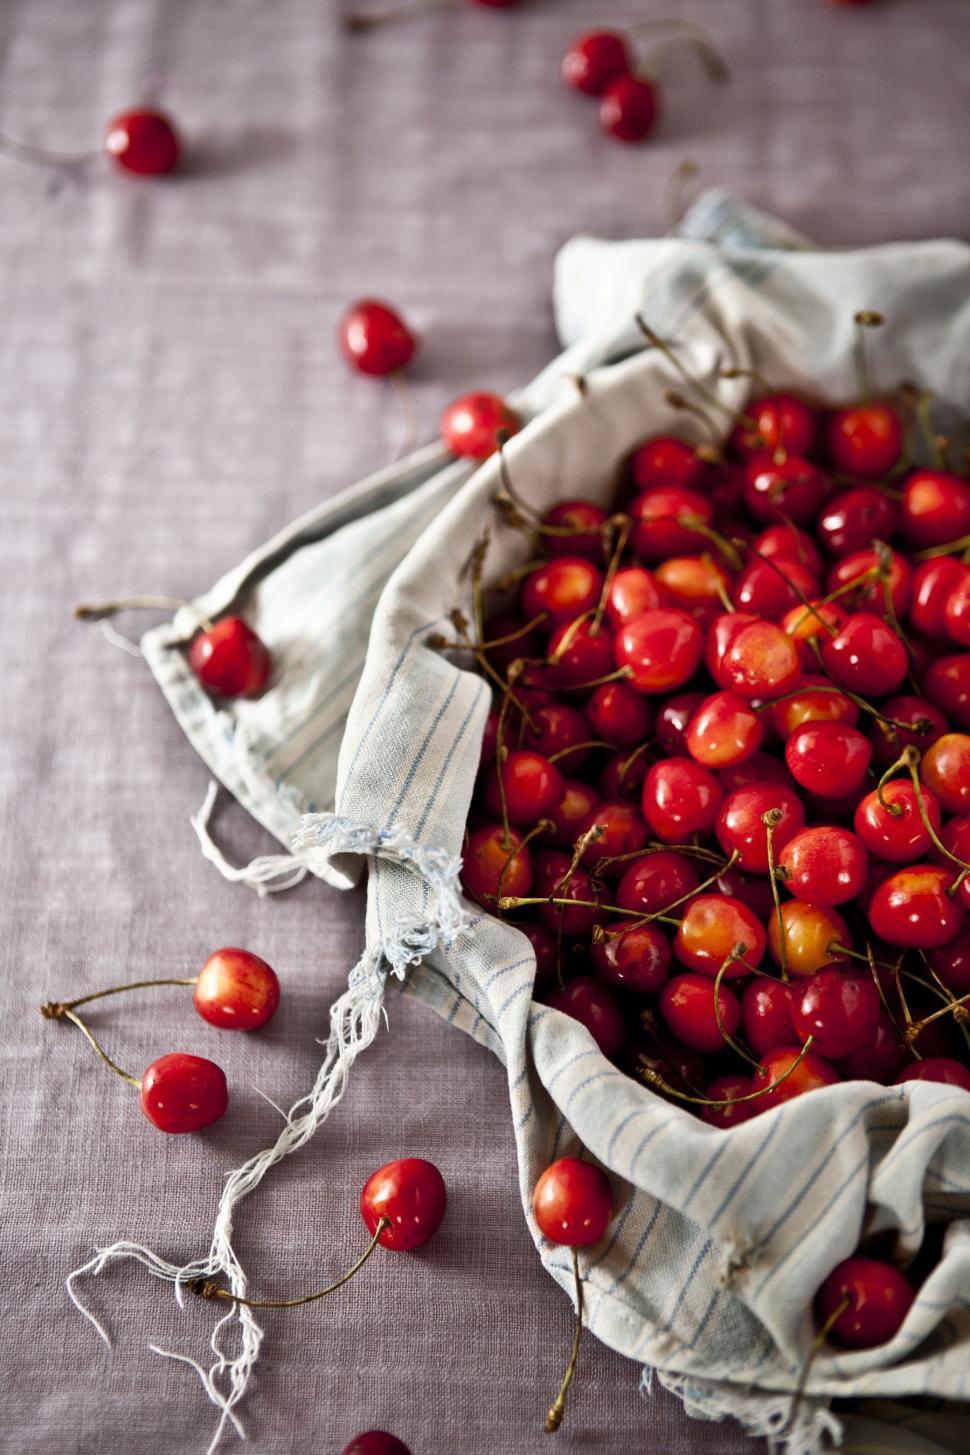 Free Image of Cloth Bag Filled With Cherries 